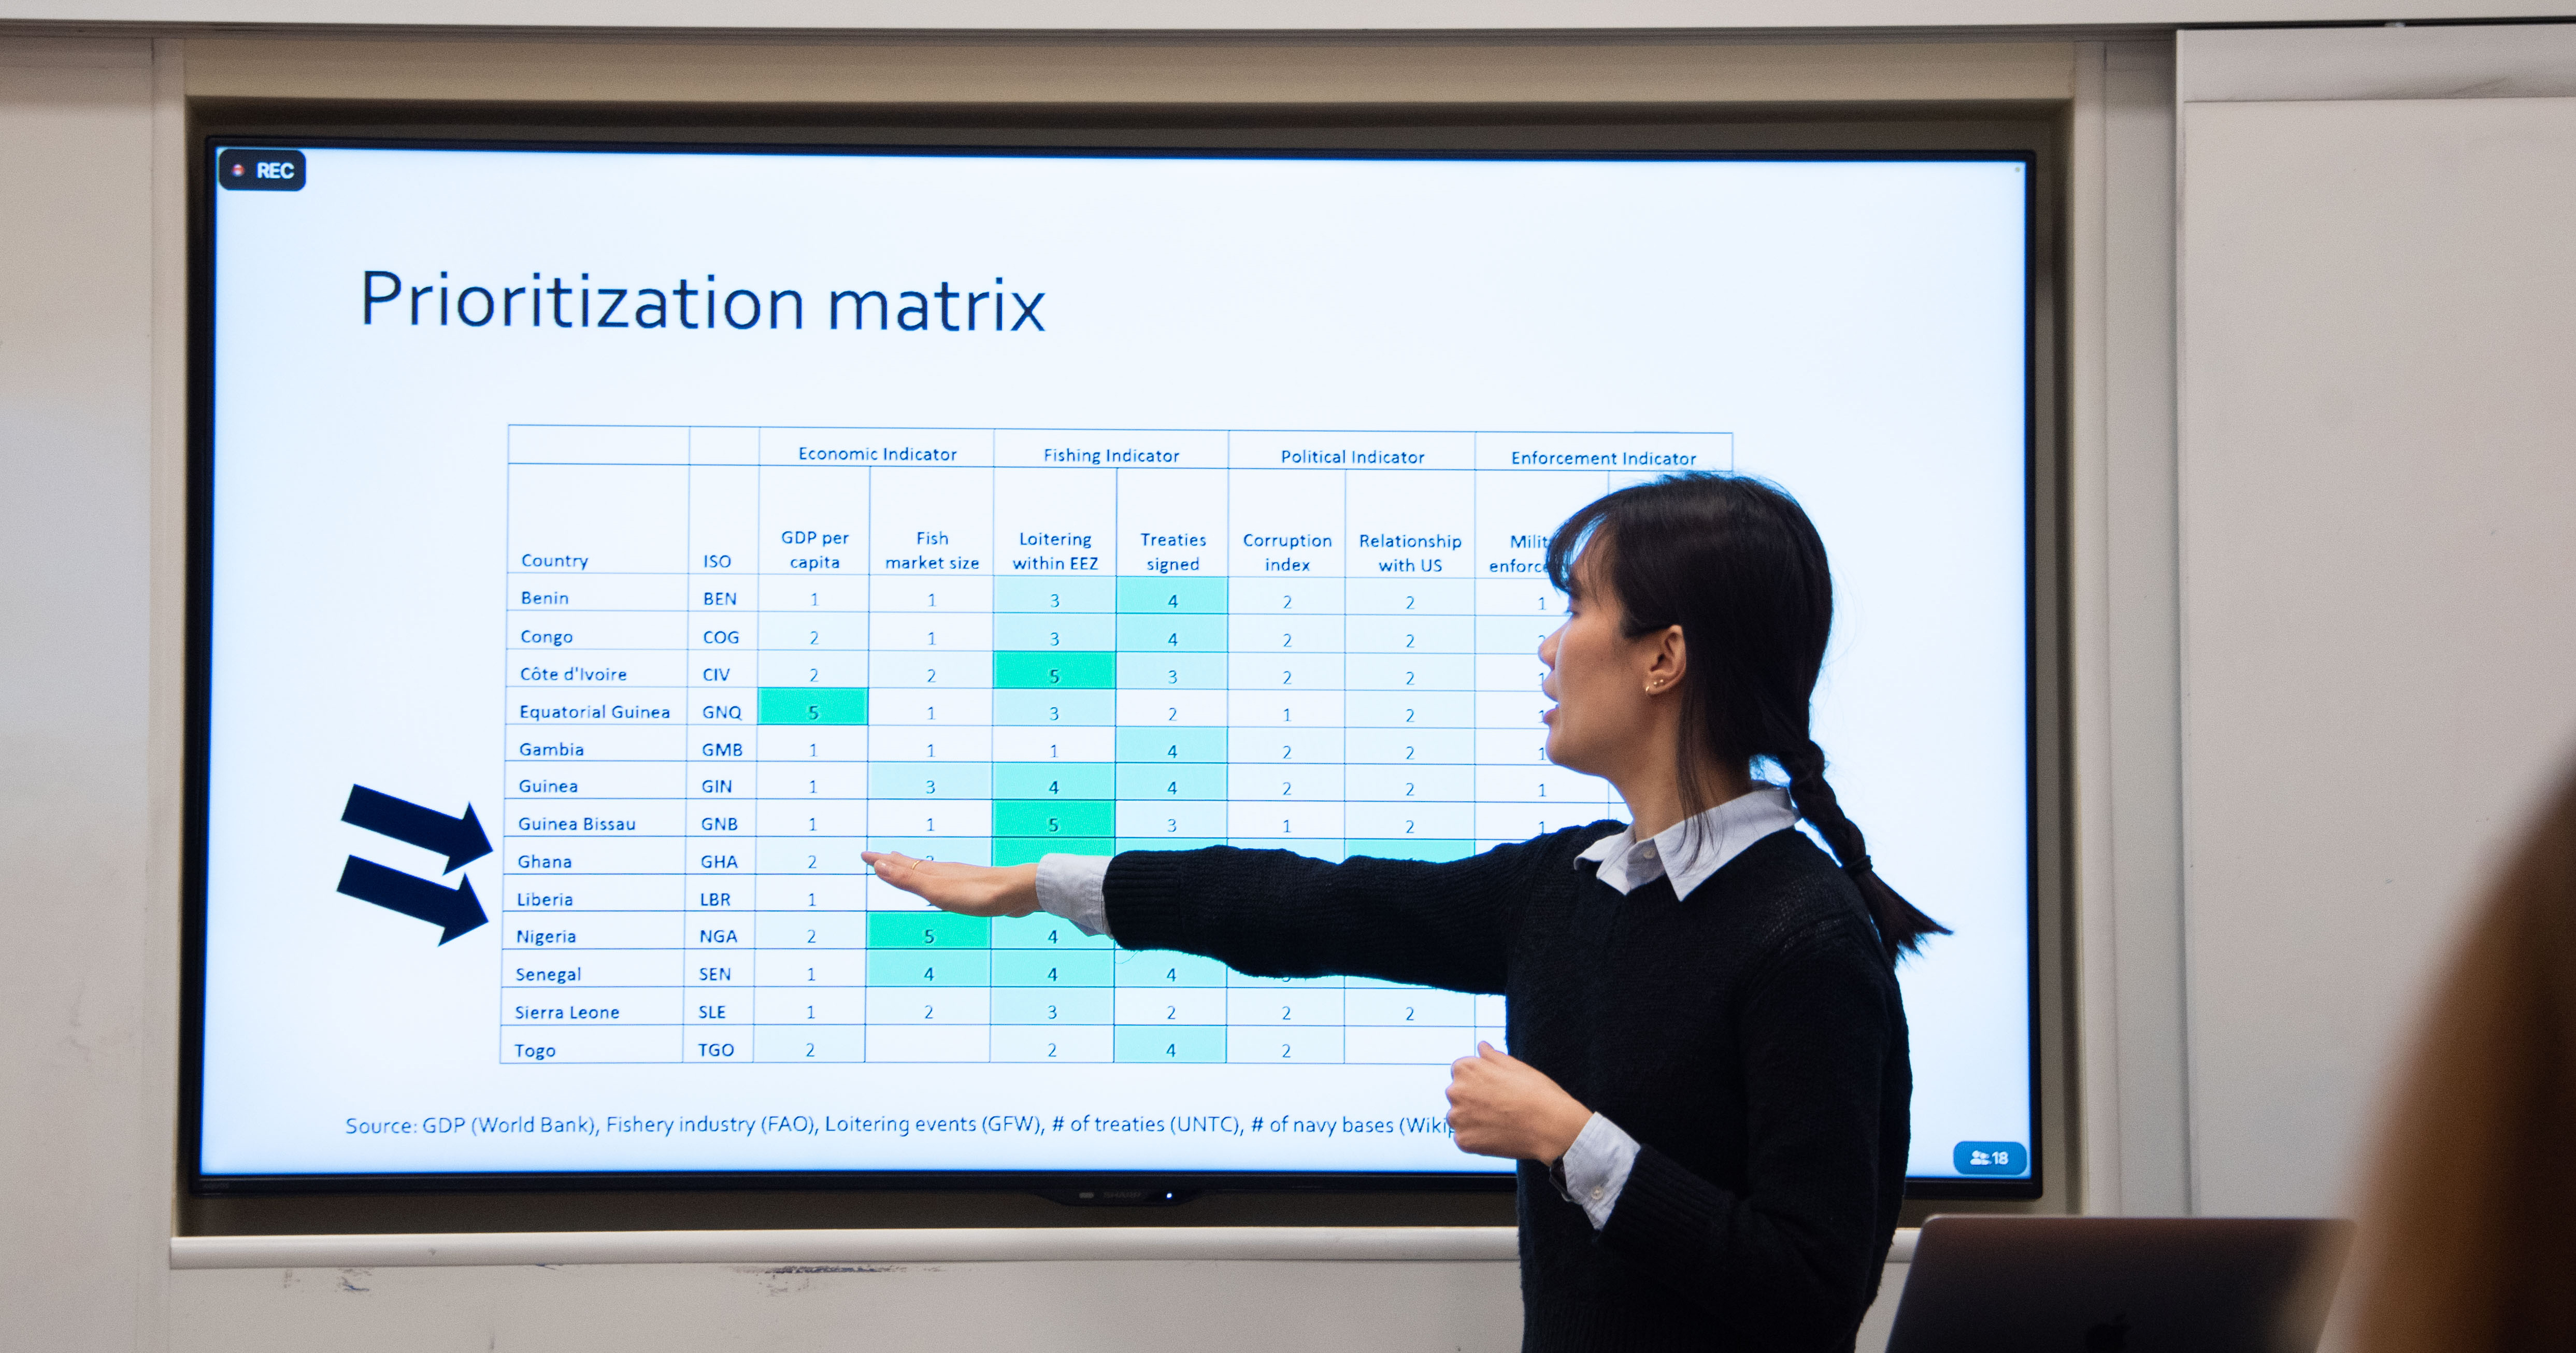 The team created a prioritization matrix for enforcement of IUU fishing.